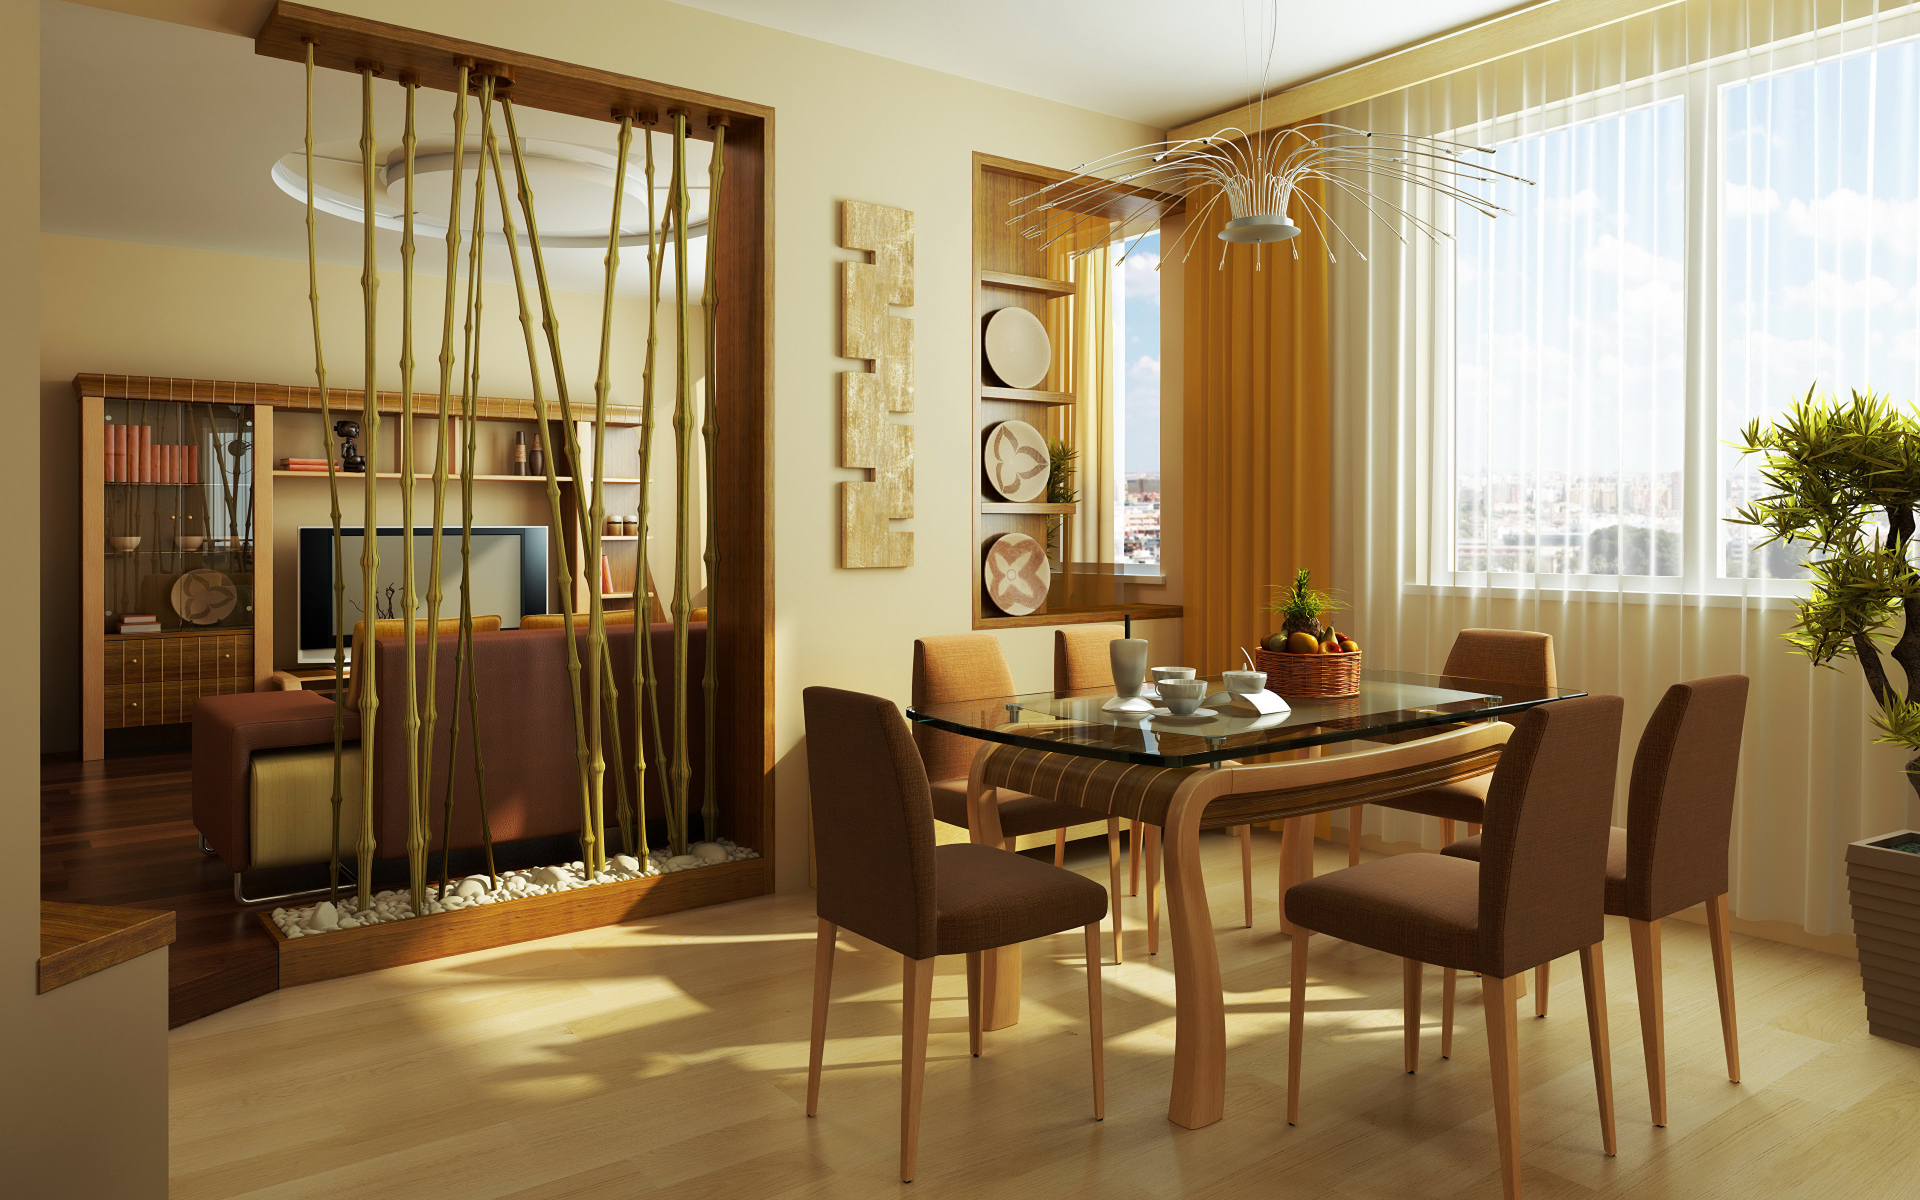 Dining area with dining table and chairs by the window